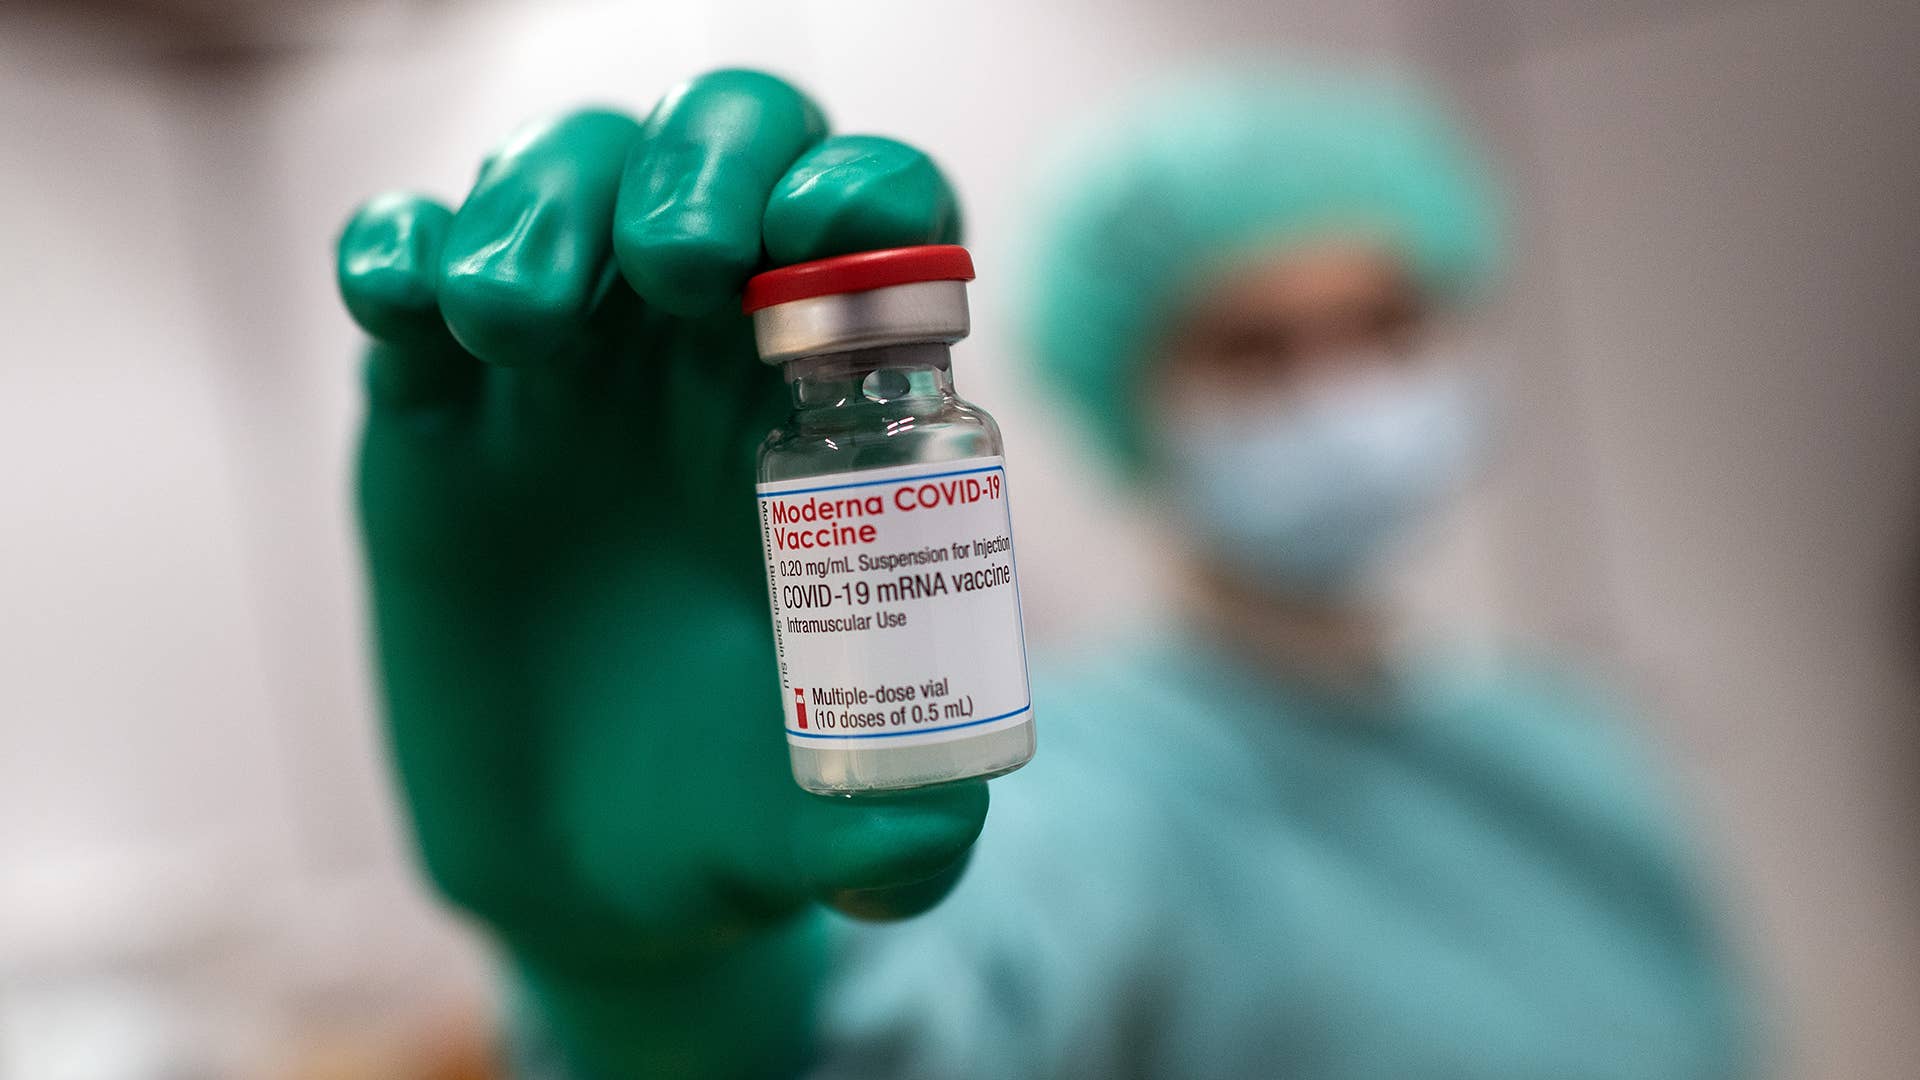 A doctor holds a jar of Moderna's vaccine against Covid 19